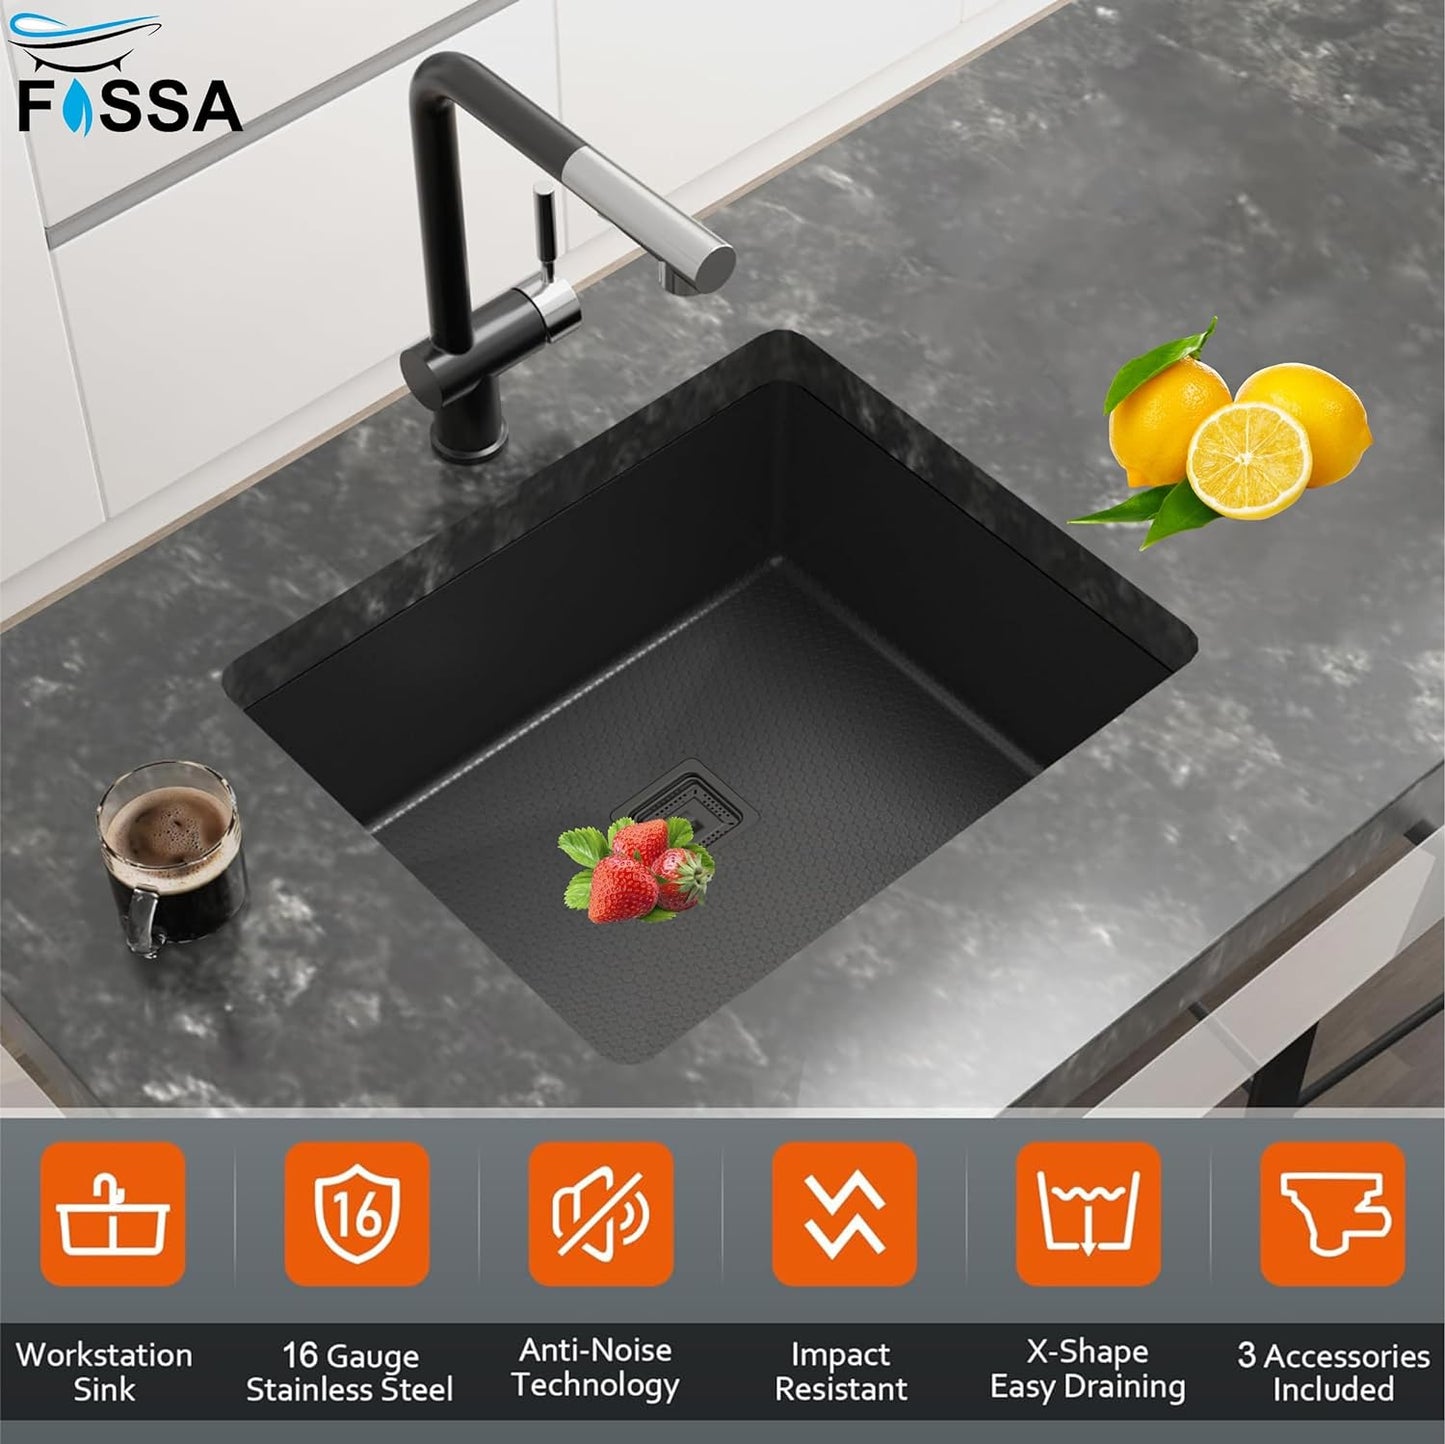 Fossa 18"x16"x09" Single Bowl Honeycomb Embossed Sink with Black Nano Coating, Stainless Steel Single Bowl Sink, Rectangular Workstation with Drainer and Overflow Set (Black)